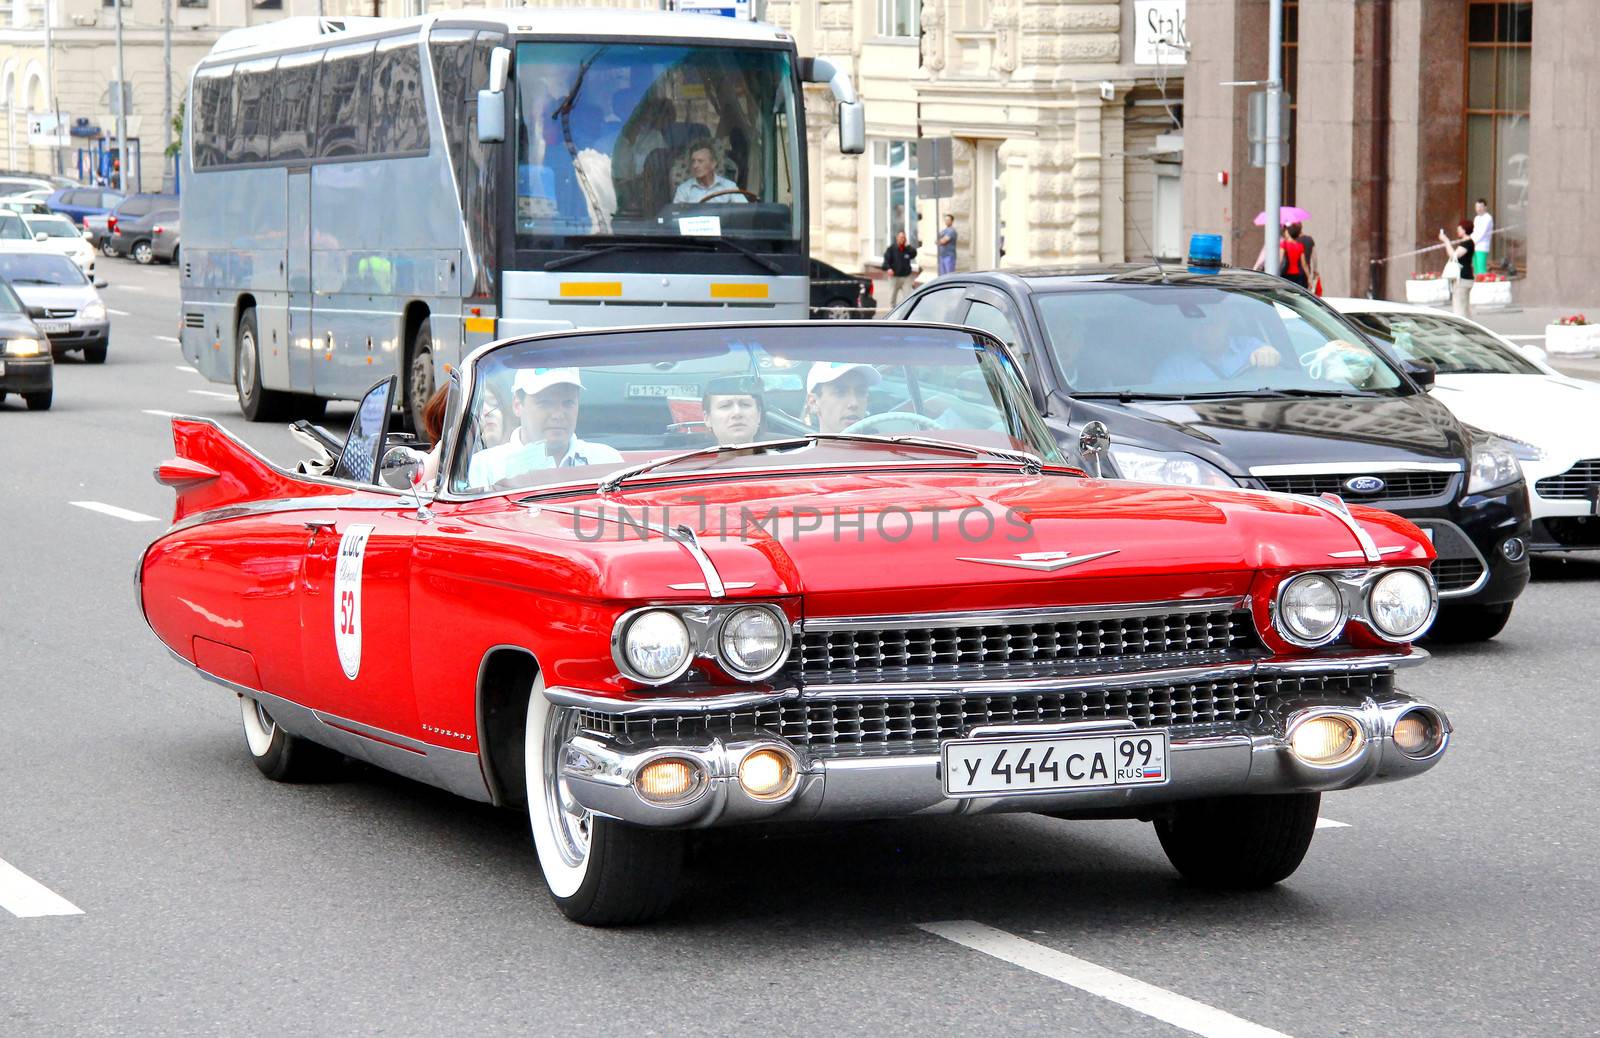 MOSCOW, RUSSIA - JUNE 2: American motor car Cadillac Eldorado competes at the annual L.U.C. Chopard Classic Weekend Rally on June 2, 2013 in Moscow, Russia.